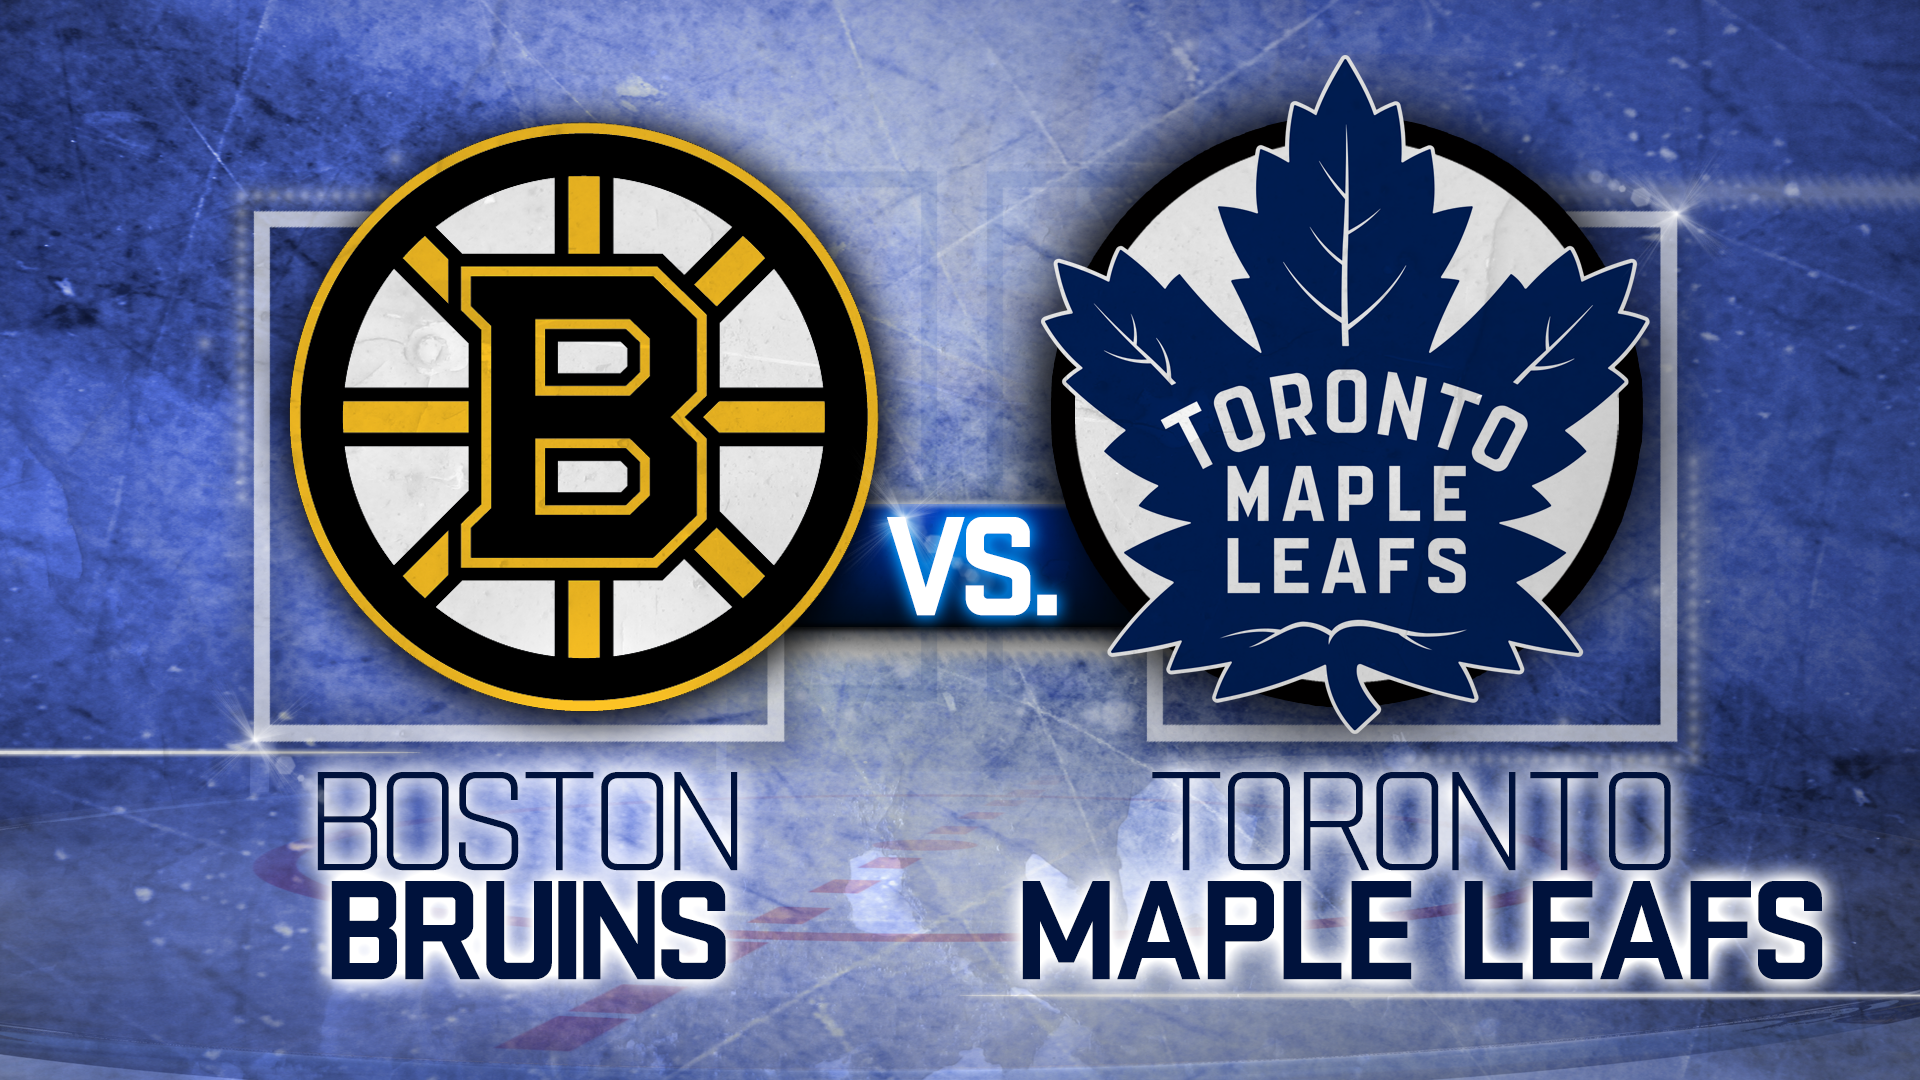 Bruins beat Maple Leafs 4-2 in Game 3 to take series lead - Boston News,  Weather, Sports | WHDH 7News